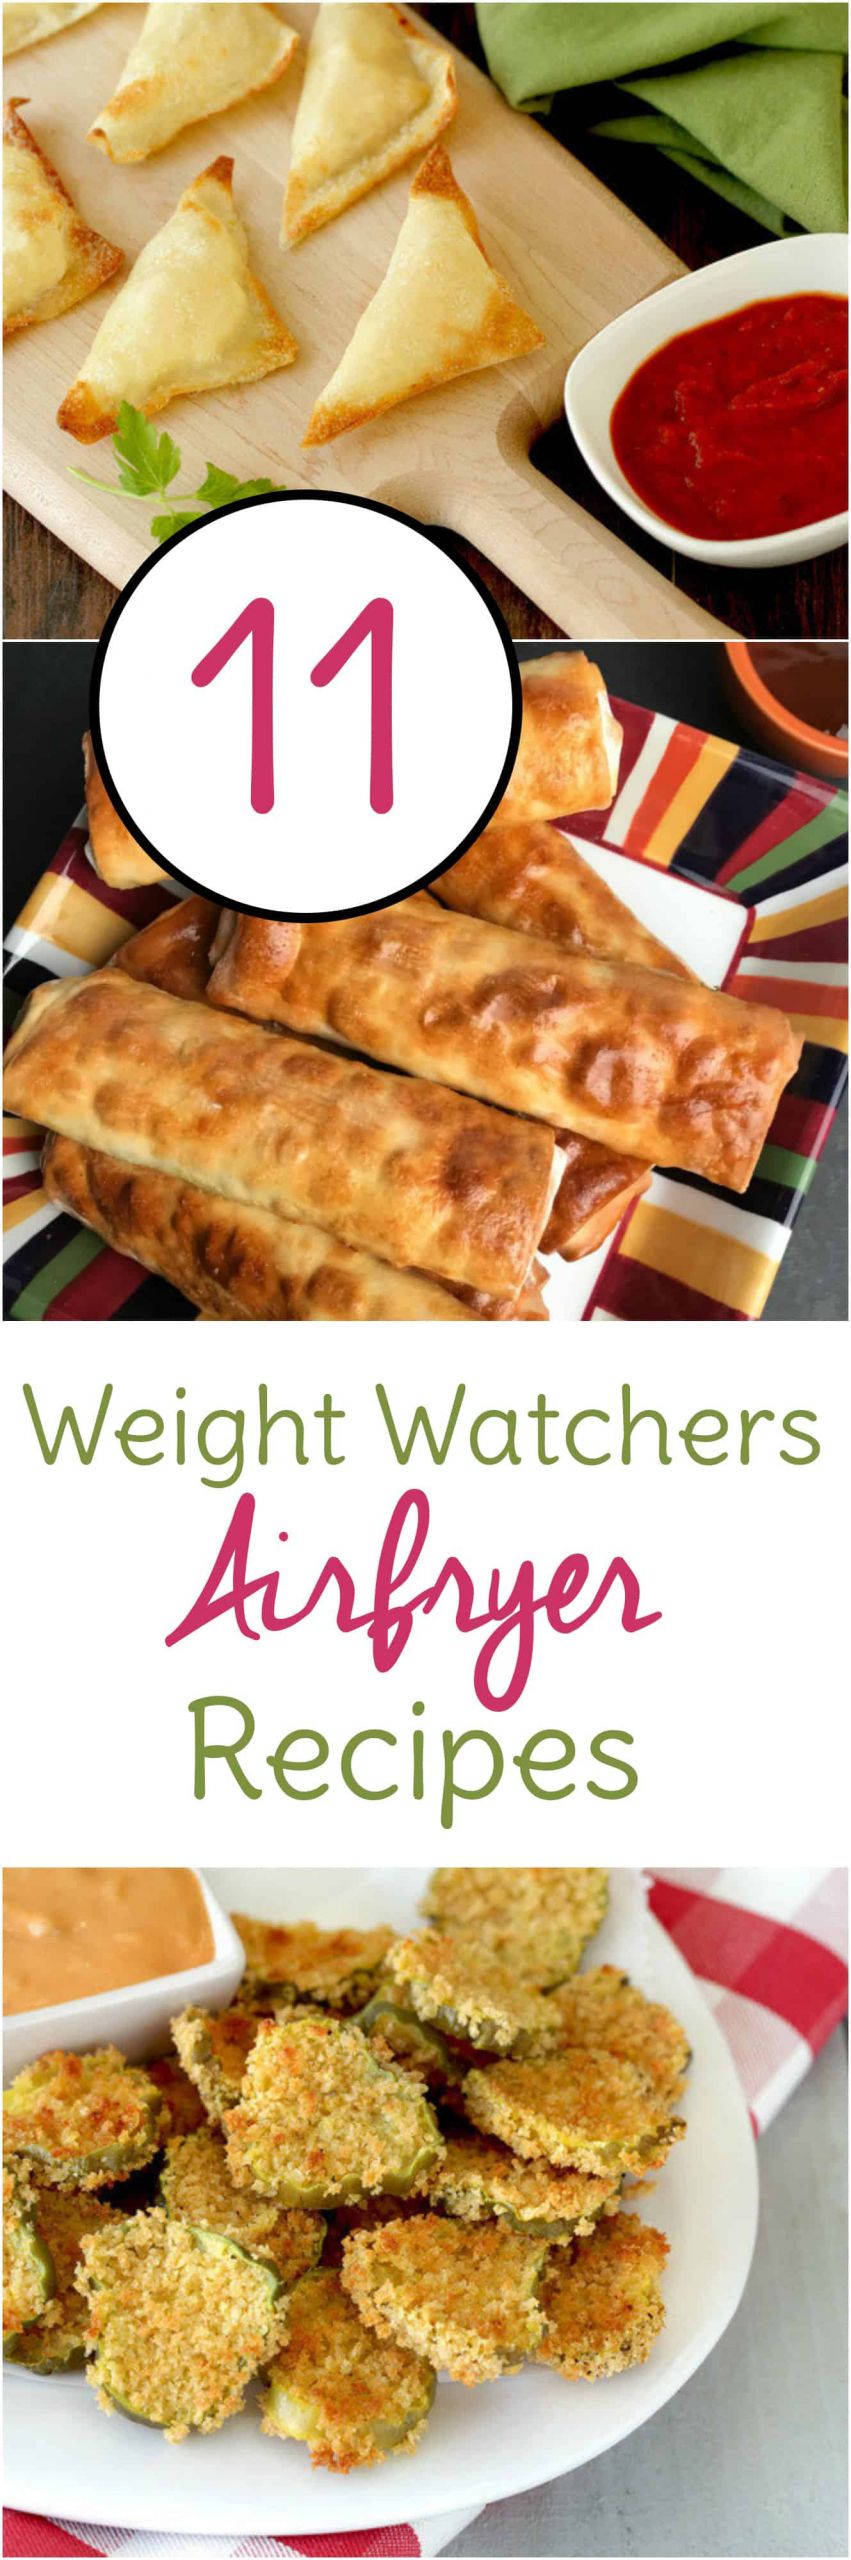 Air Fryer Weight Loss Recipes
 Top 20 Air Fryer Weight Loss Recipes Best Round Up